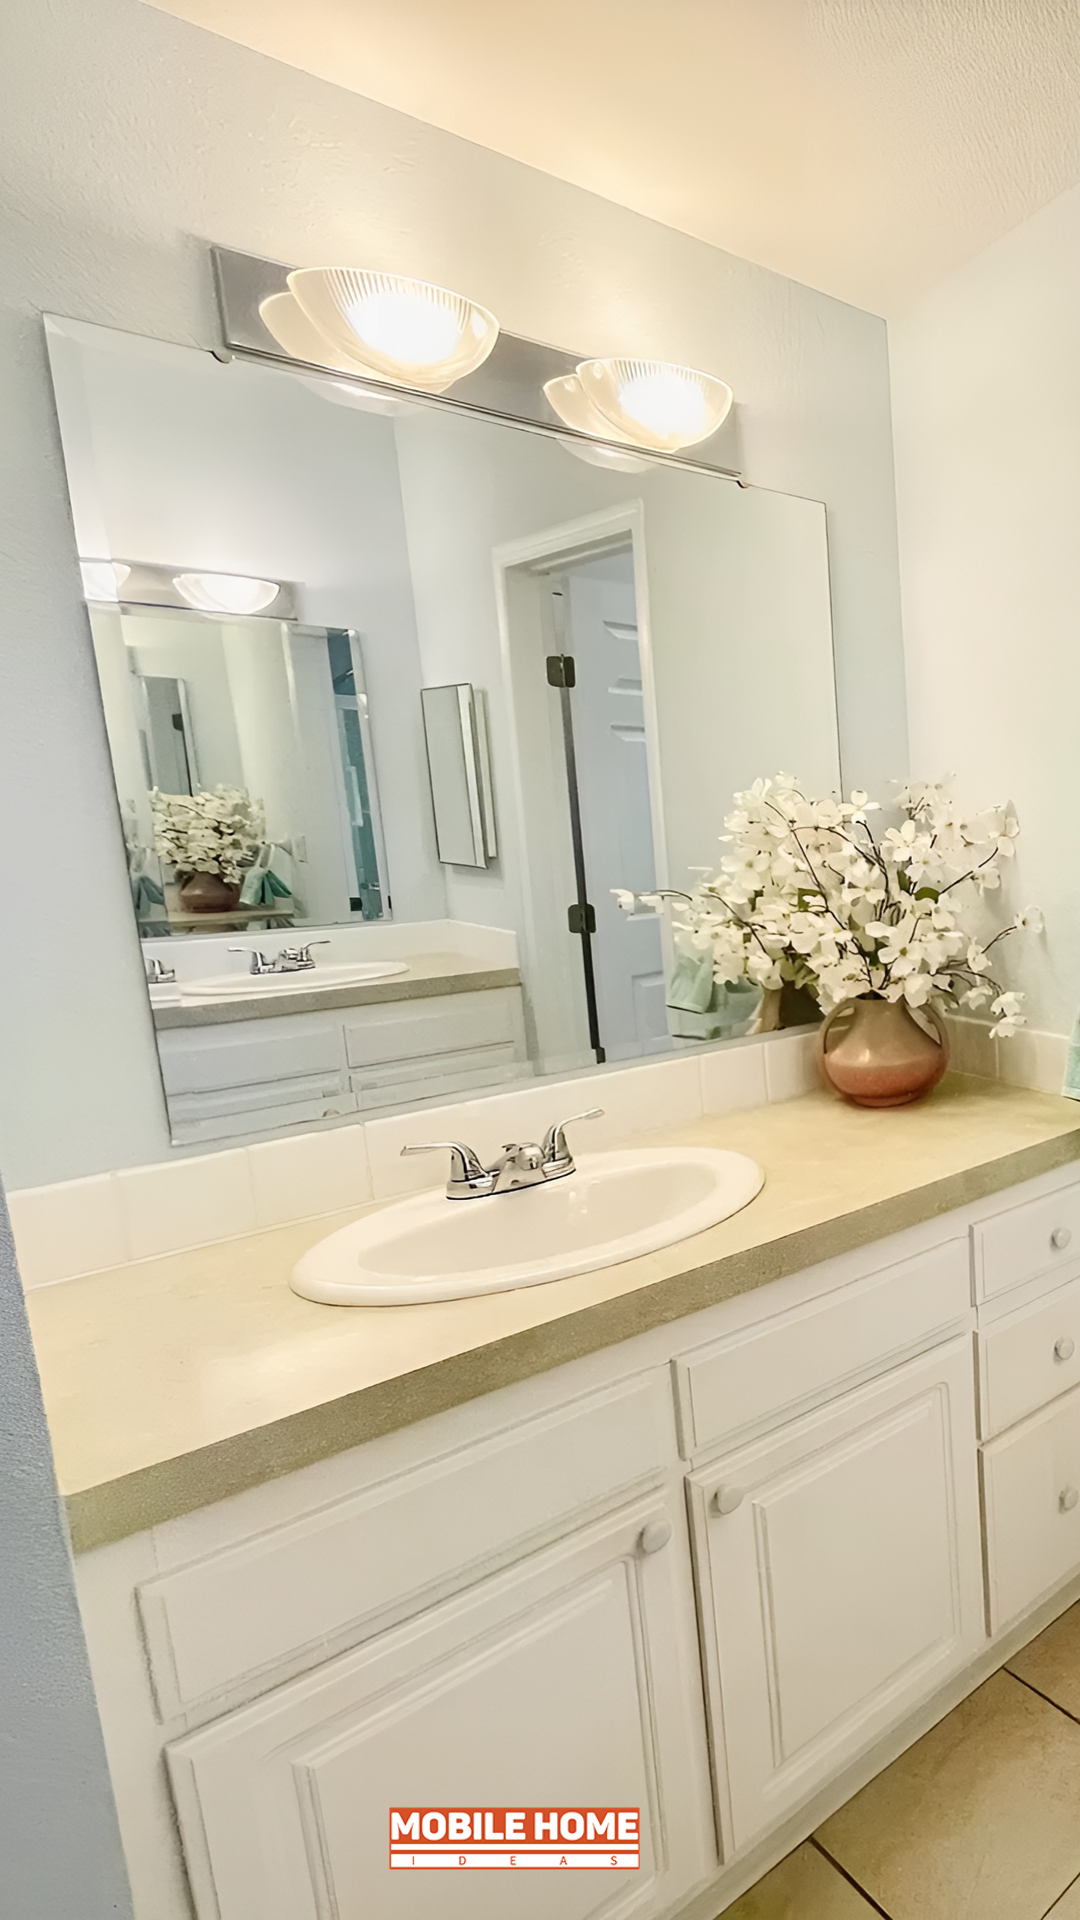 Mobile Home Bathroom Makeovers Add a Statement Mirror